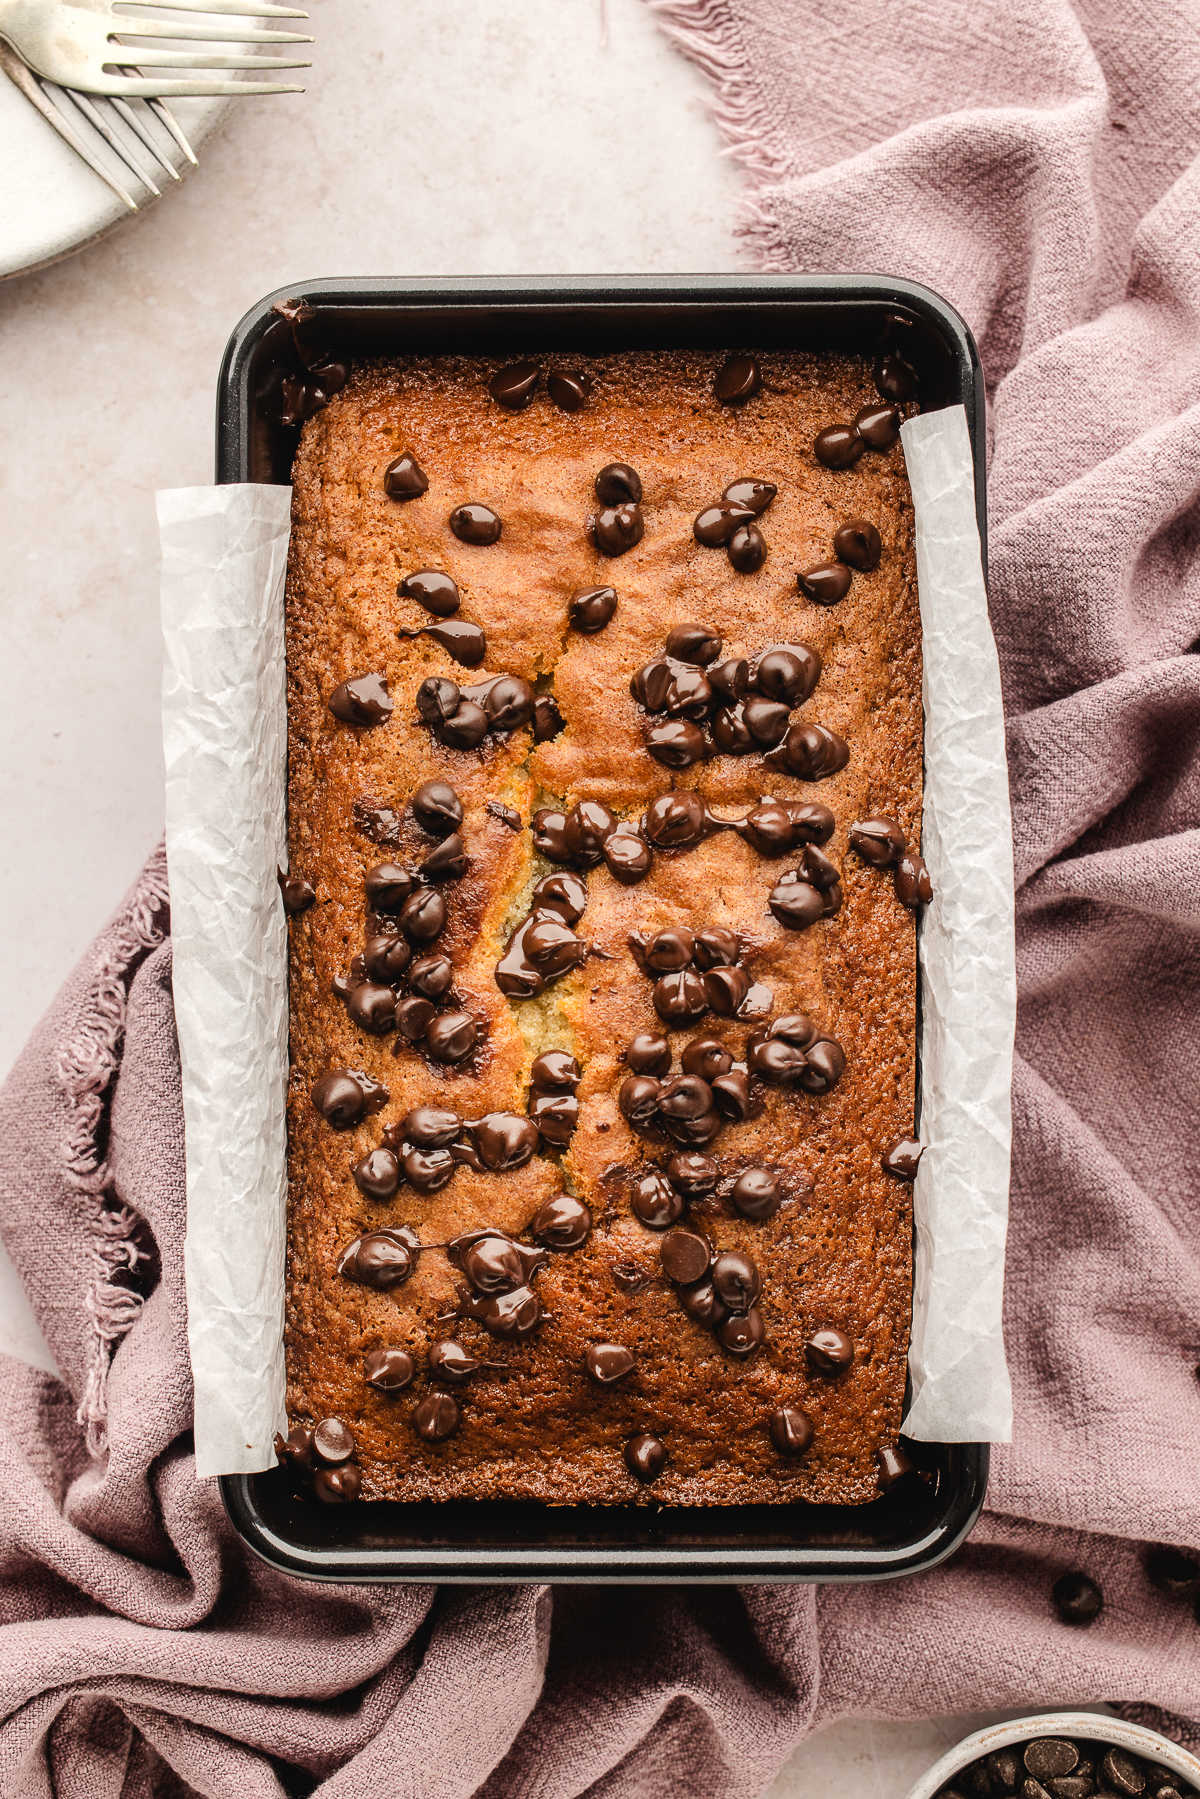 A baked chocolate chip loaf cake in the pan.